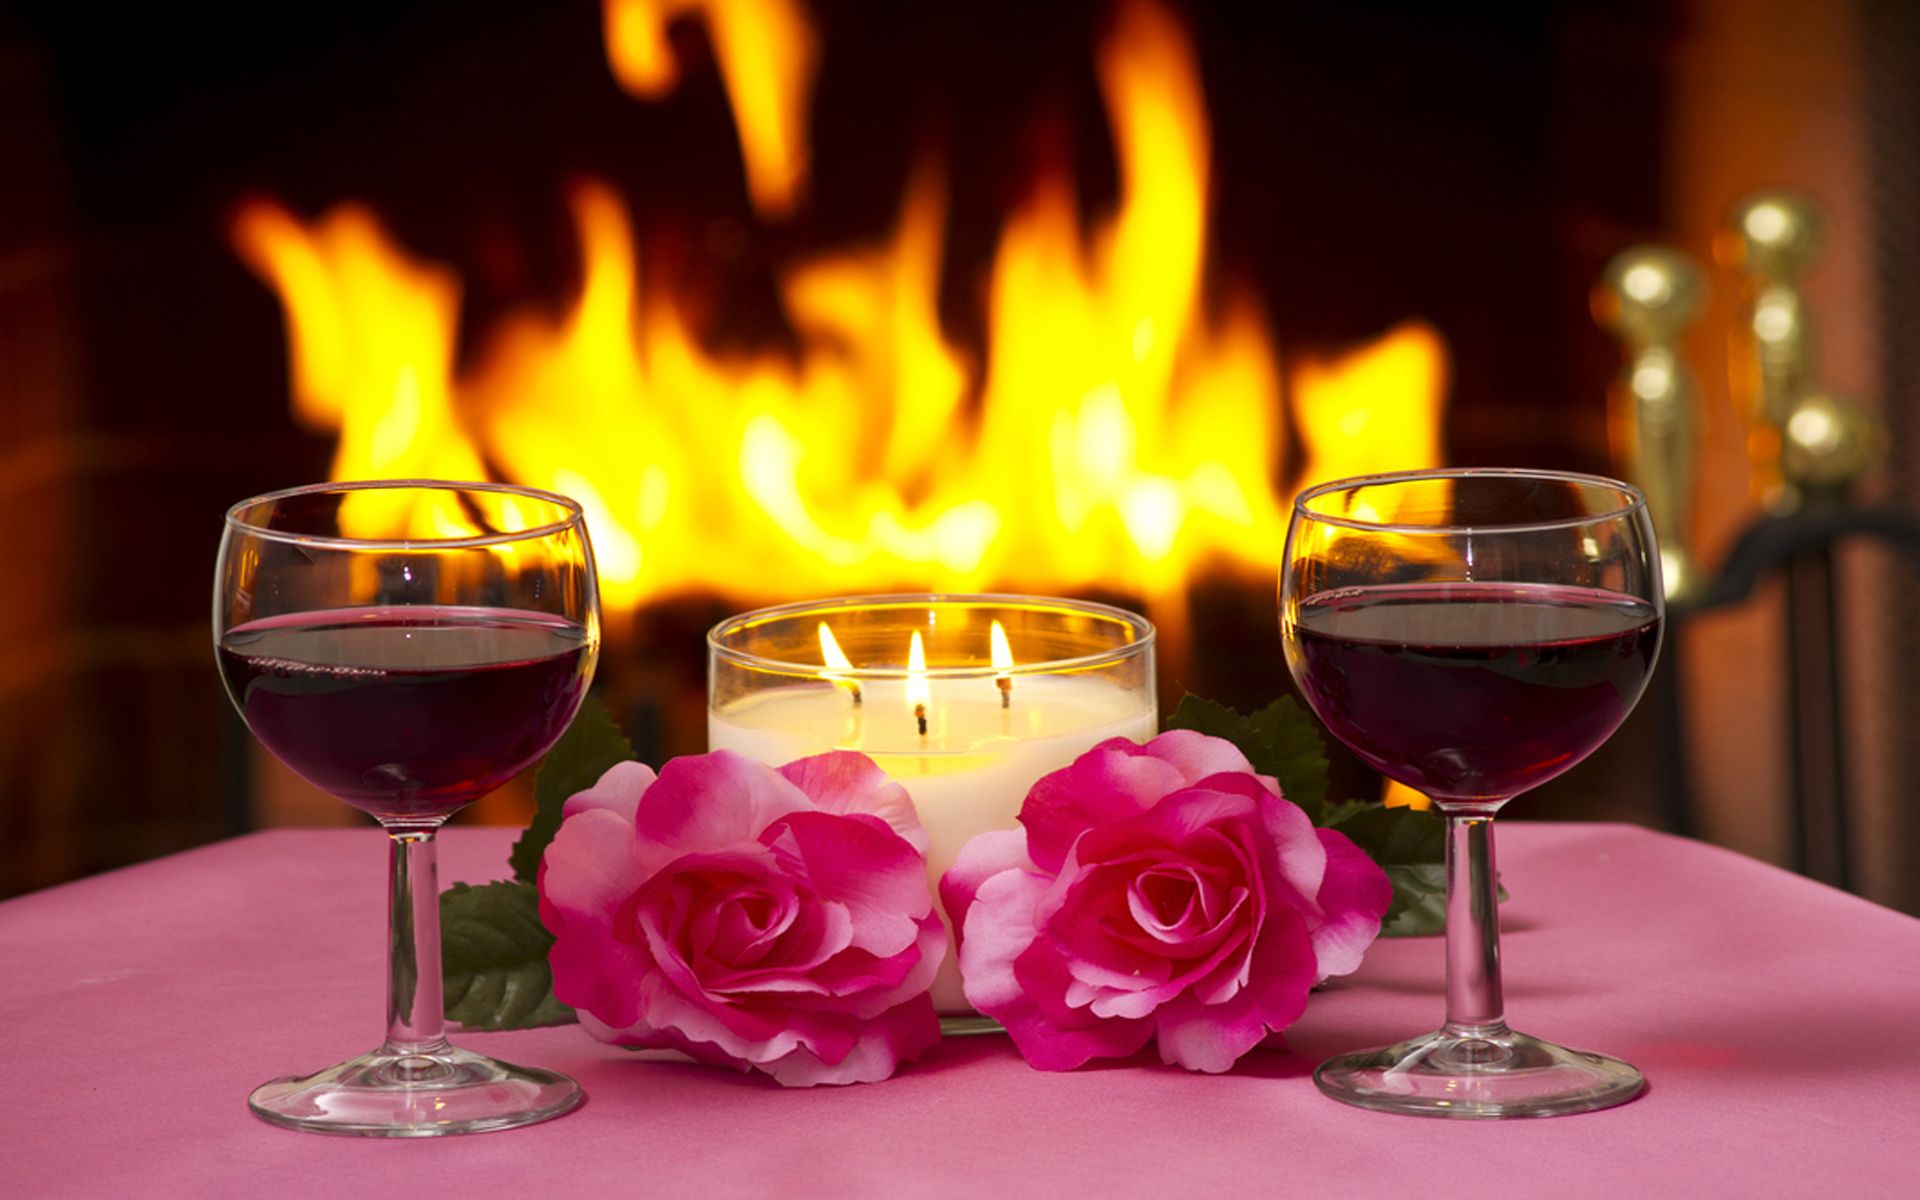 Massa Two Pink Roses Lamp Lit Candles, Two Glasses Of Red Wine, A Fireplace With A Fire Lit Romantic Evening For Two Wallpaper HD For Mobile Phone, Wallpaper13.com